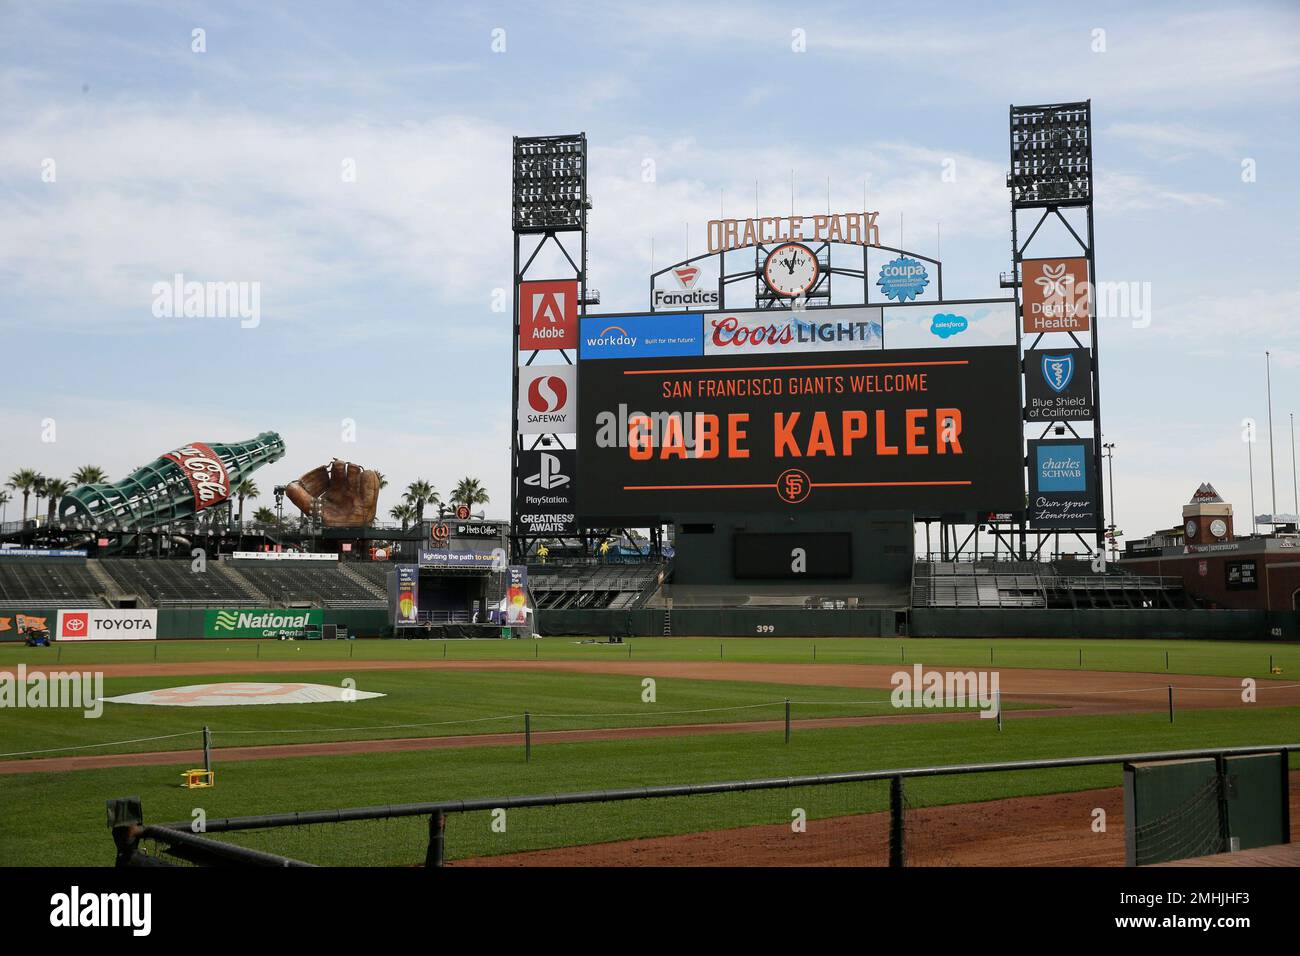 2,000 Gabe kapler Stock Pictures, Editorial Images and Stock Photos